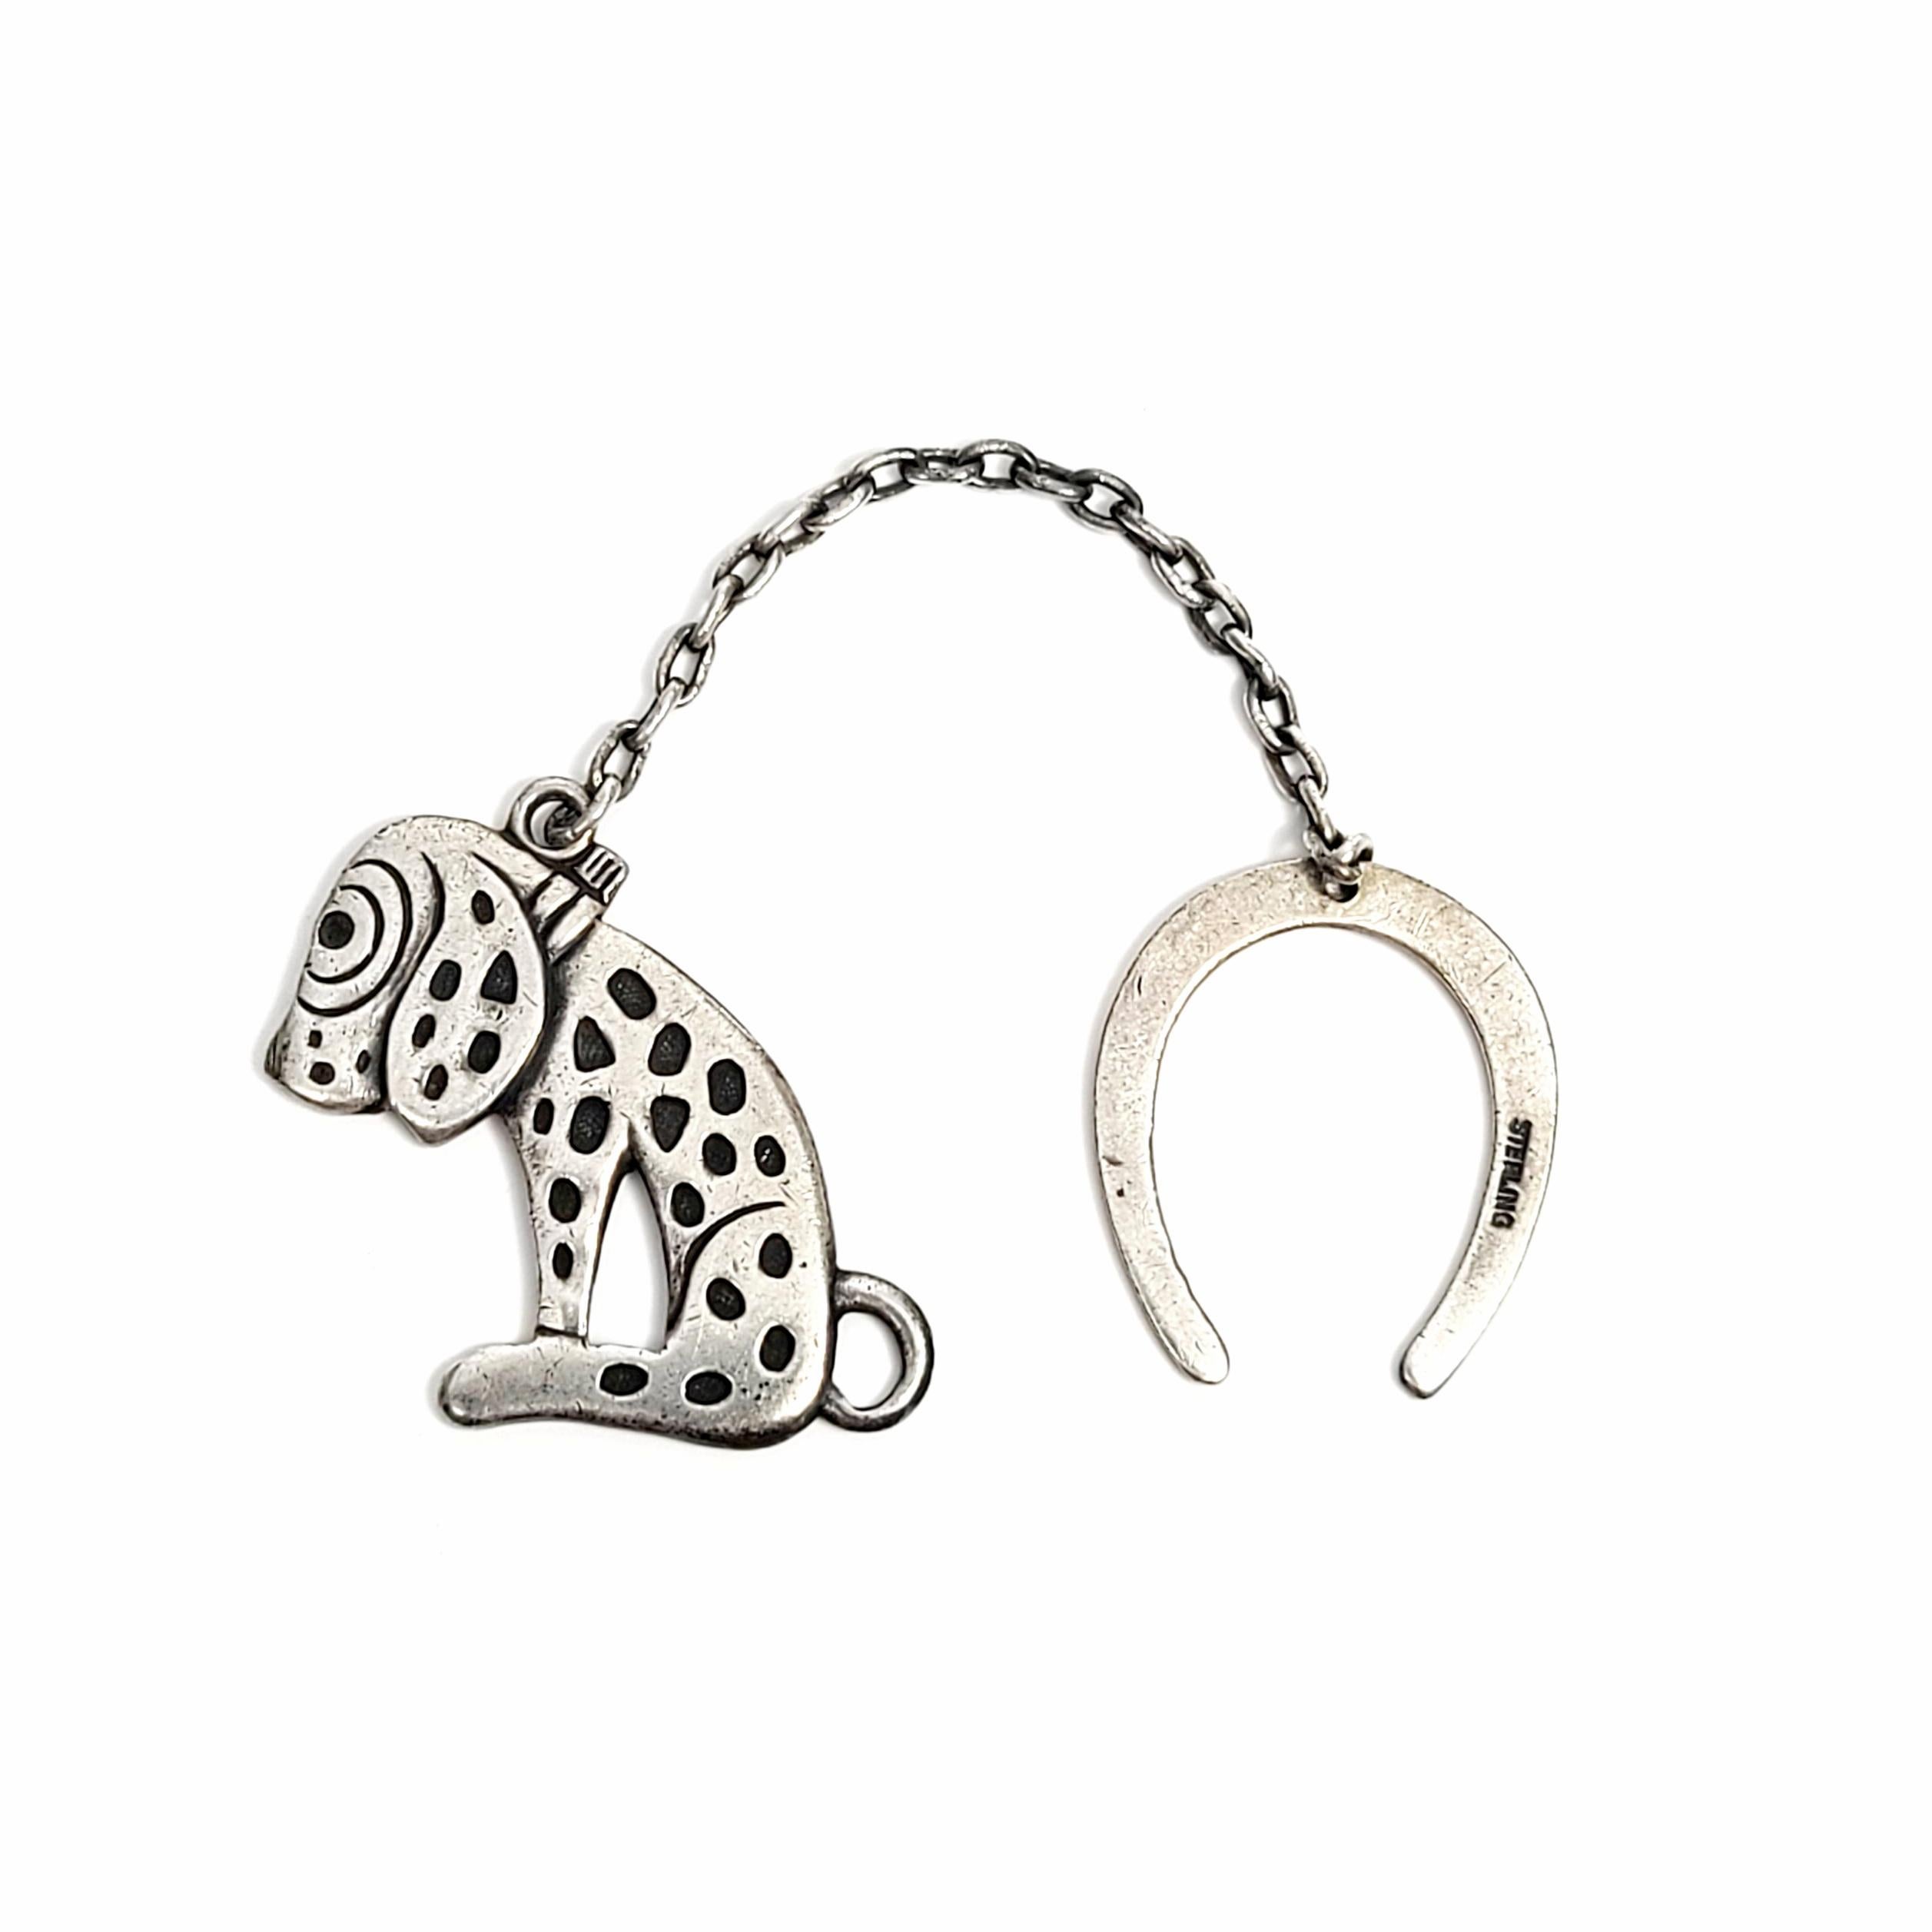 Vintage sterling silver Dismal Desmond charm and Horseshoe fob.

Dismal Desmond was a character created in the 1920s, his sadness over losing his owner became spots on his body. This charm is connected to a horseshoe fob by a short chain.

Desmond